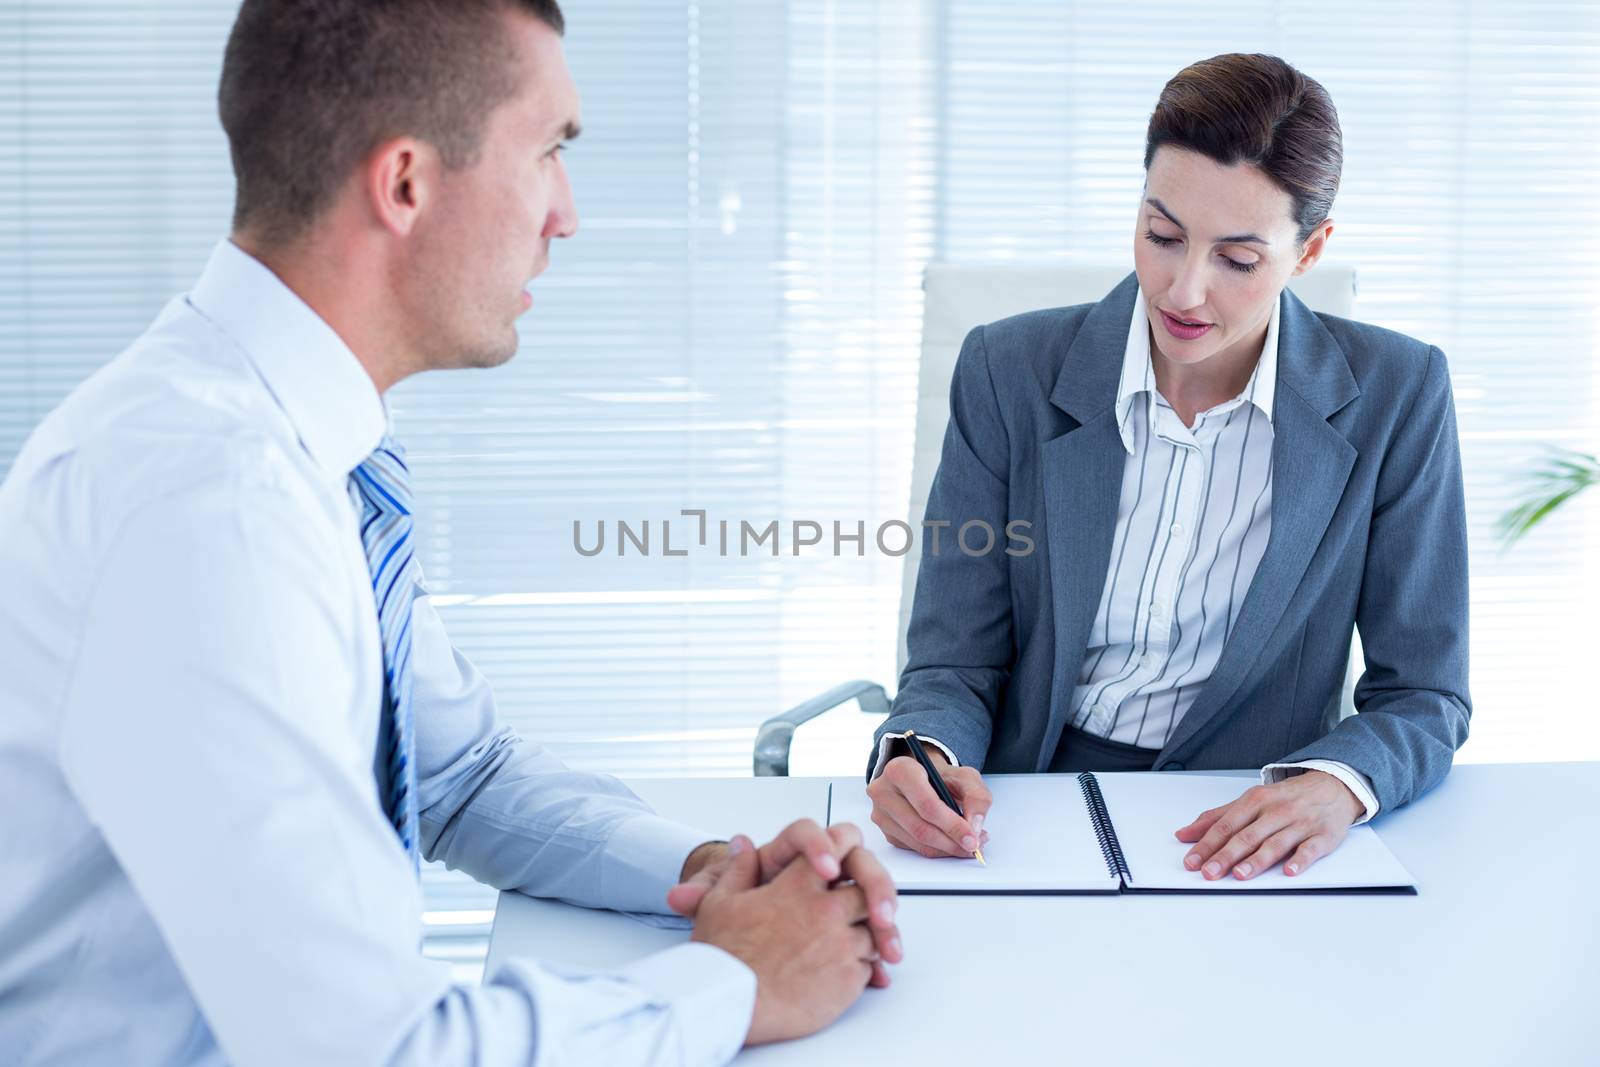 Business people in discussion in an office by Wavebreakmedia